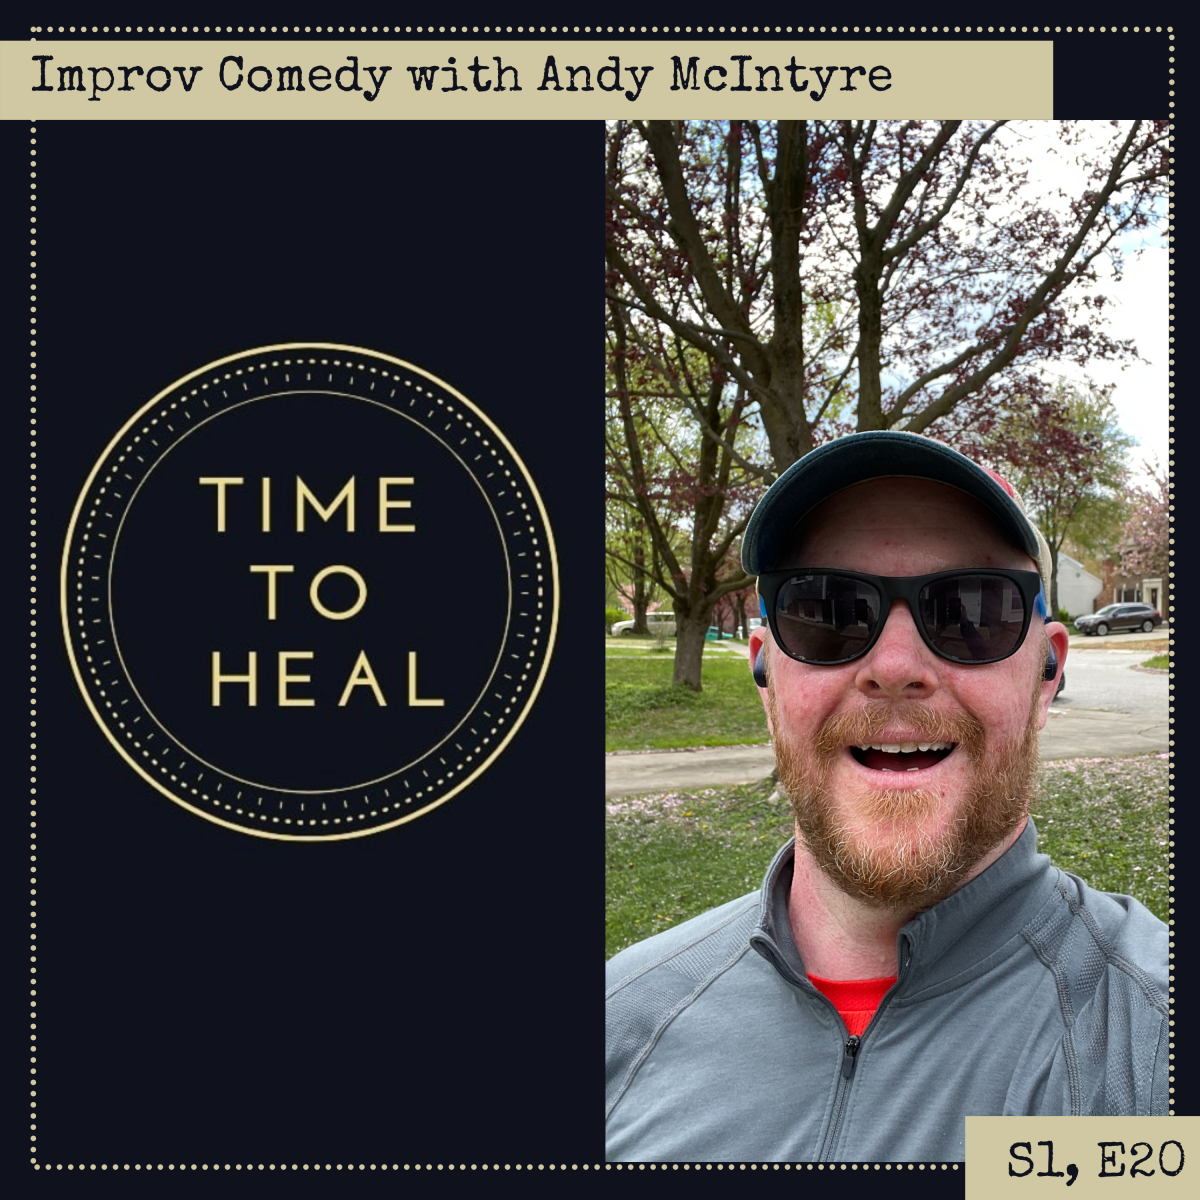 Improv Comedy with Andy McIntyre